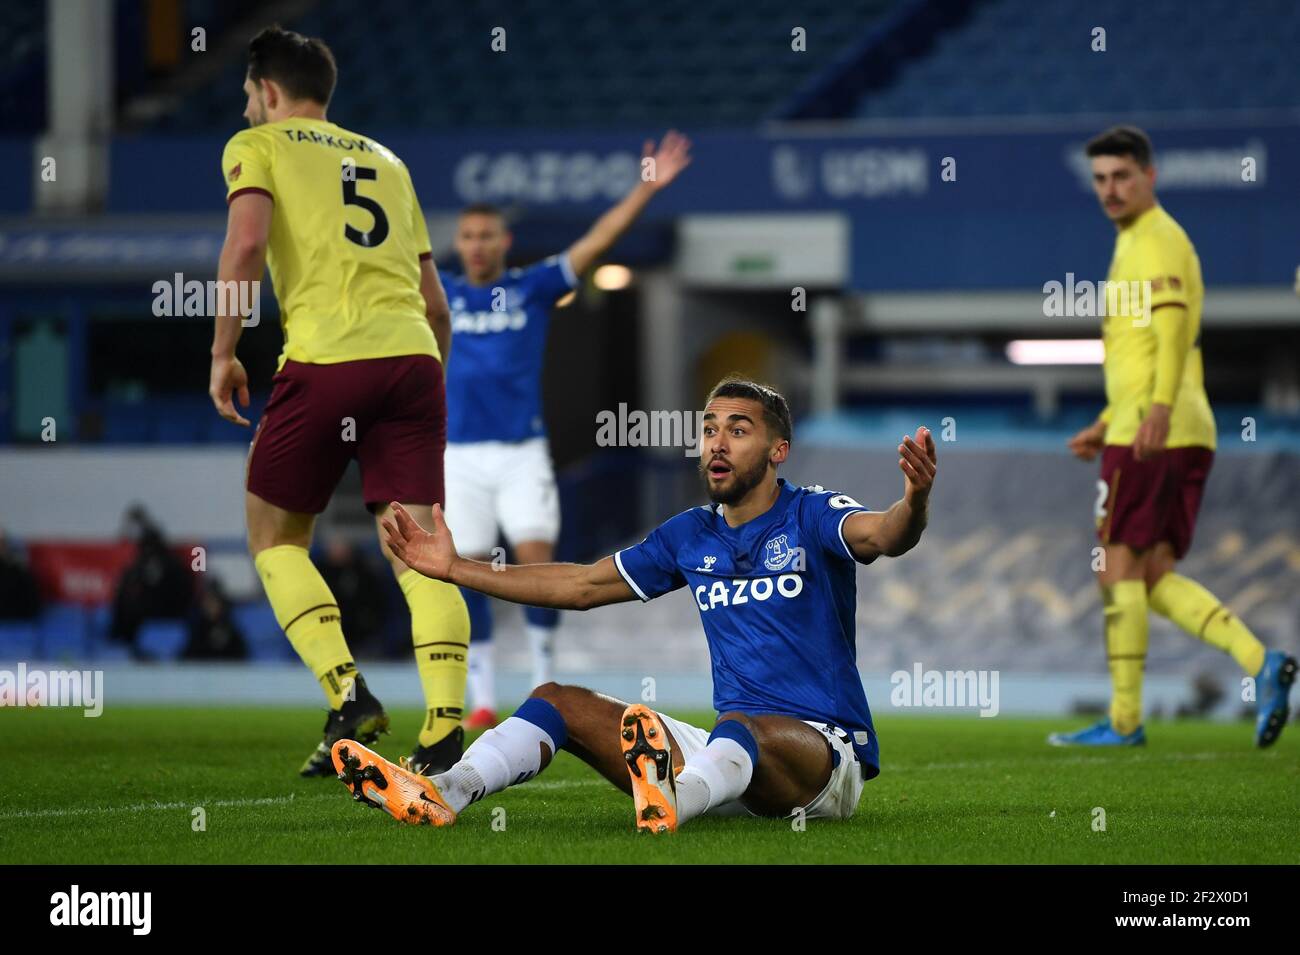 Everton's Dominic Calvert-Lewin shows his frustration towards the assistant referee during the Premier League match at Goodison Park, Liverpool. Picture date: Saturday March 13, 2021. Stock Photo